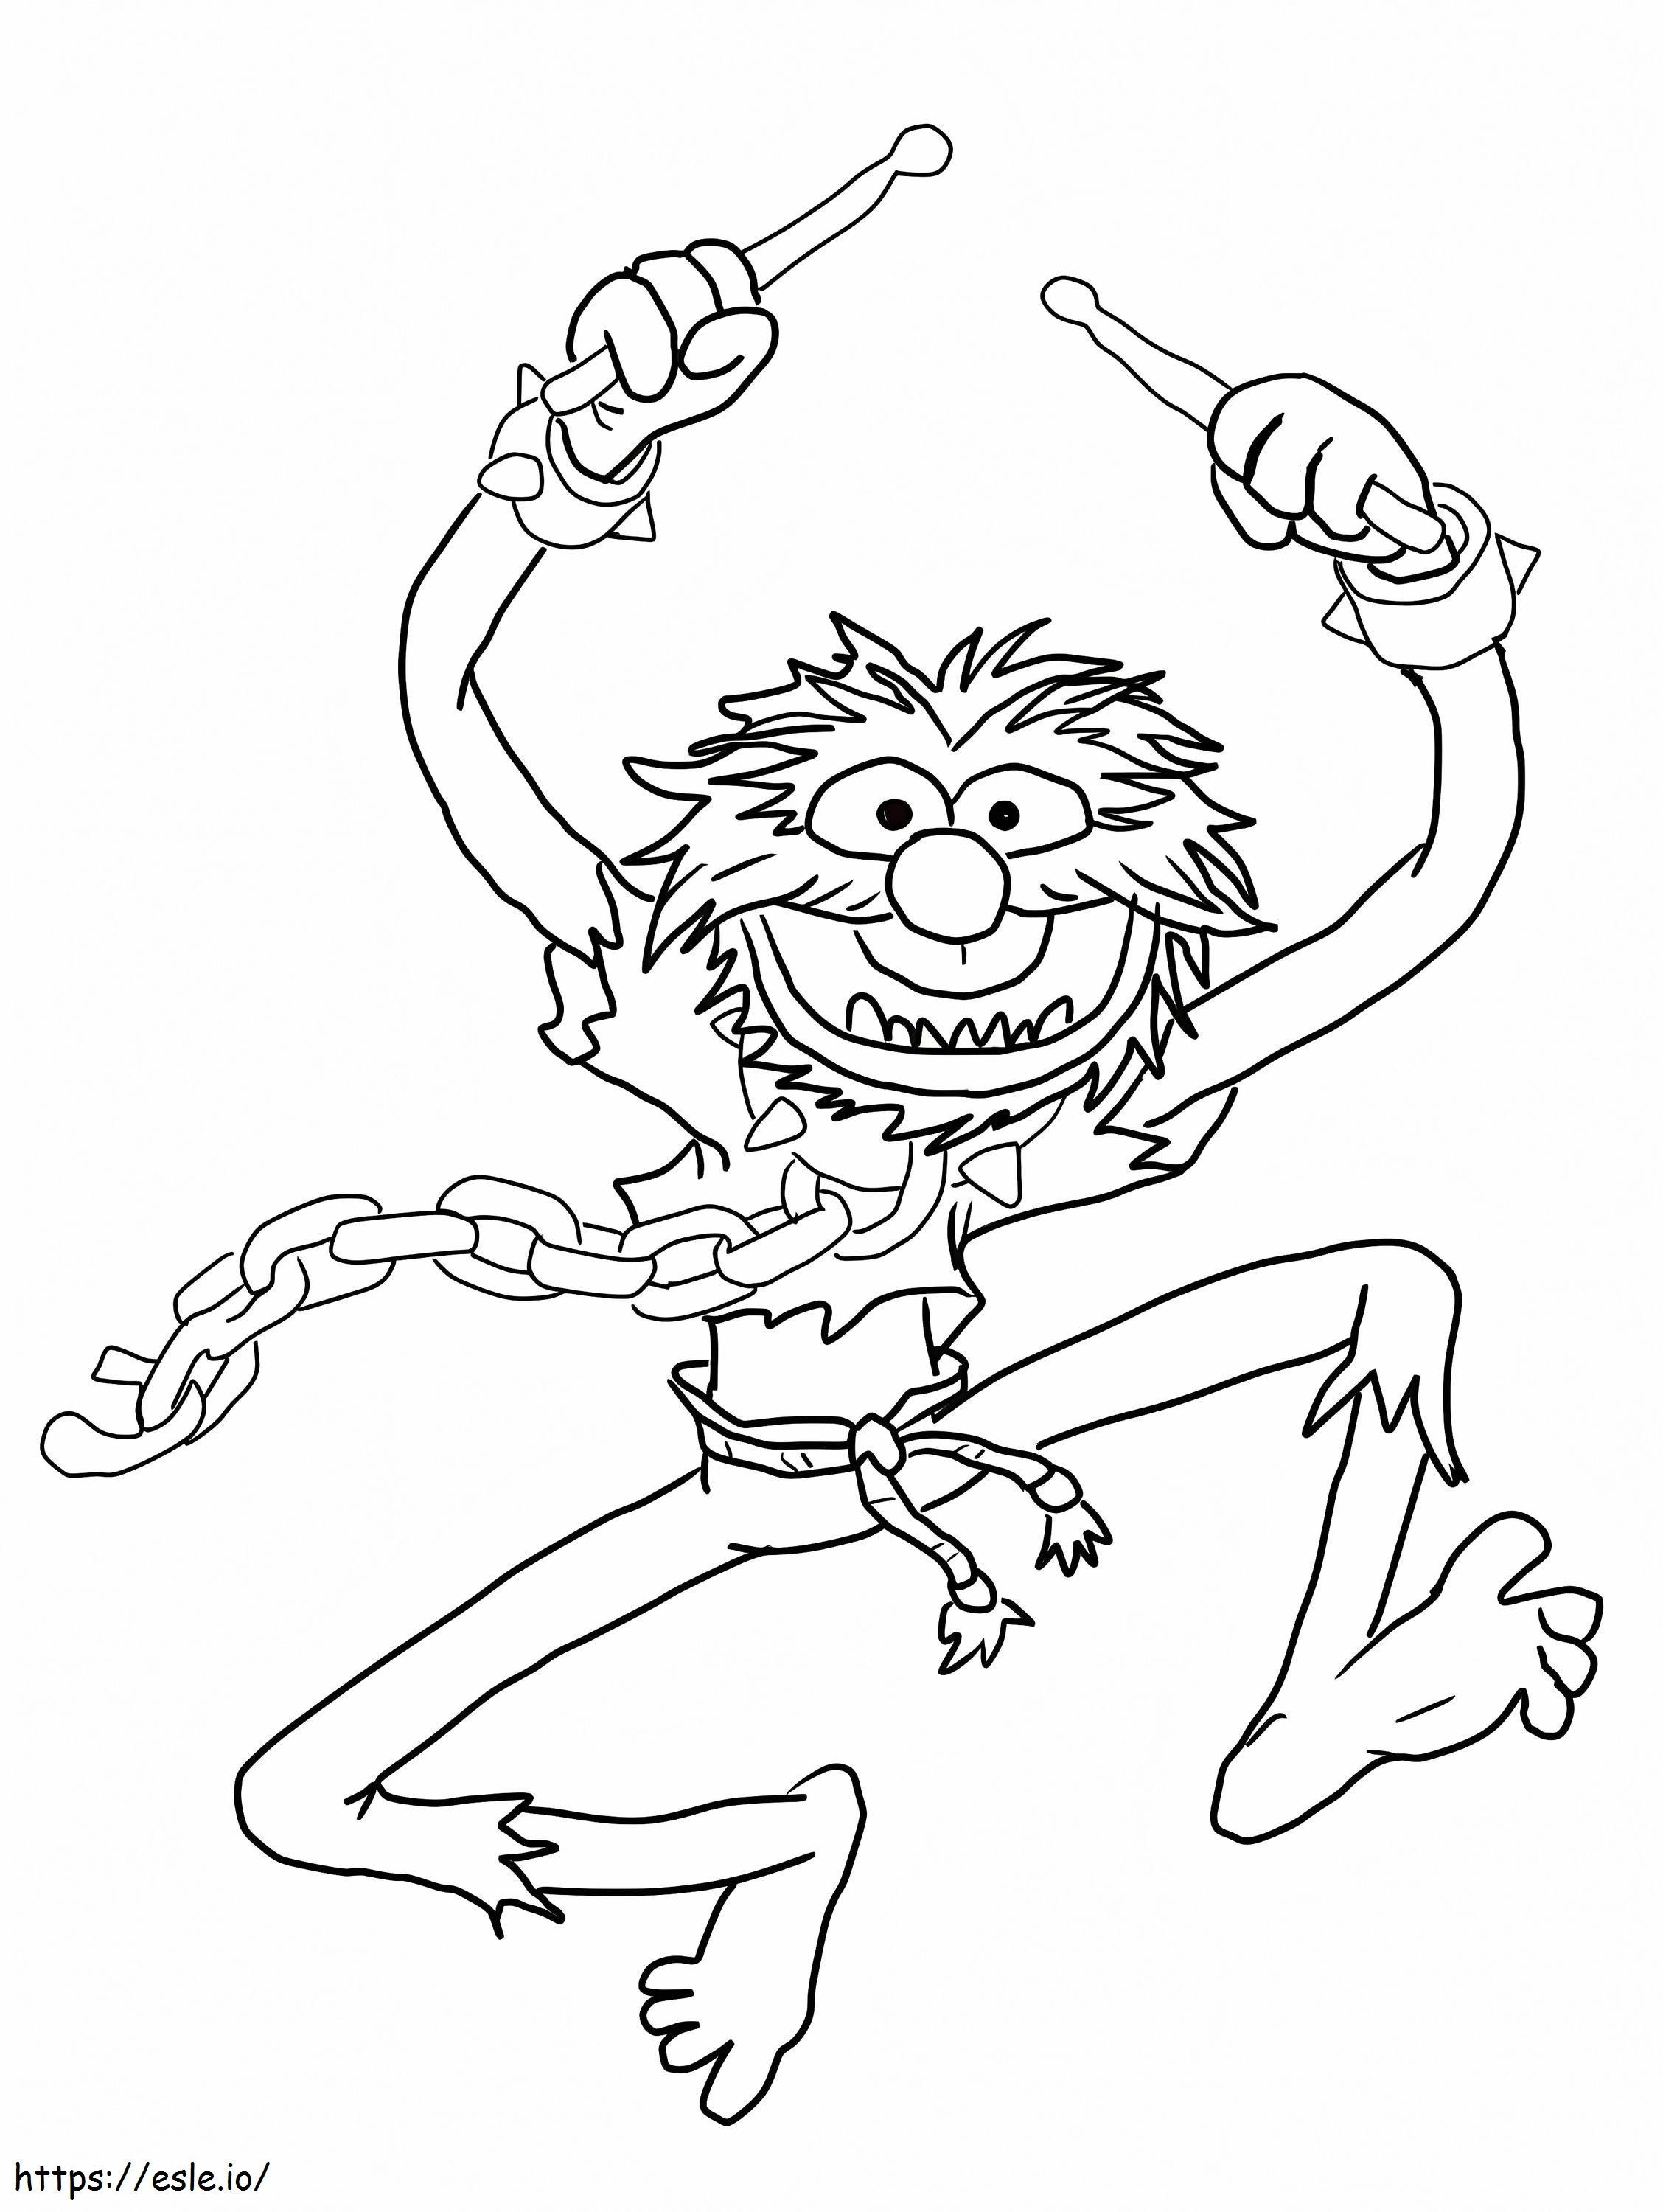 Muppets Animal With Drumsticks coloring page